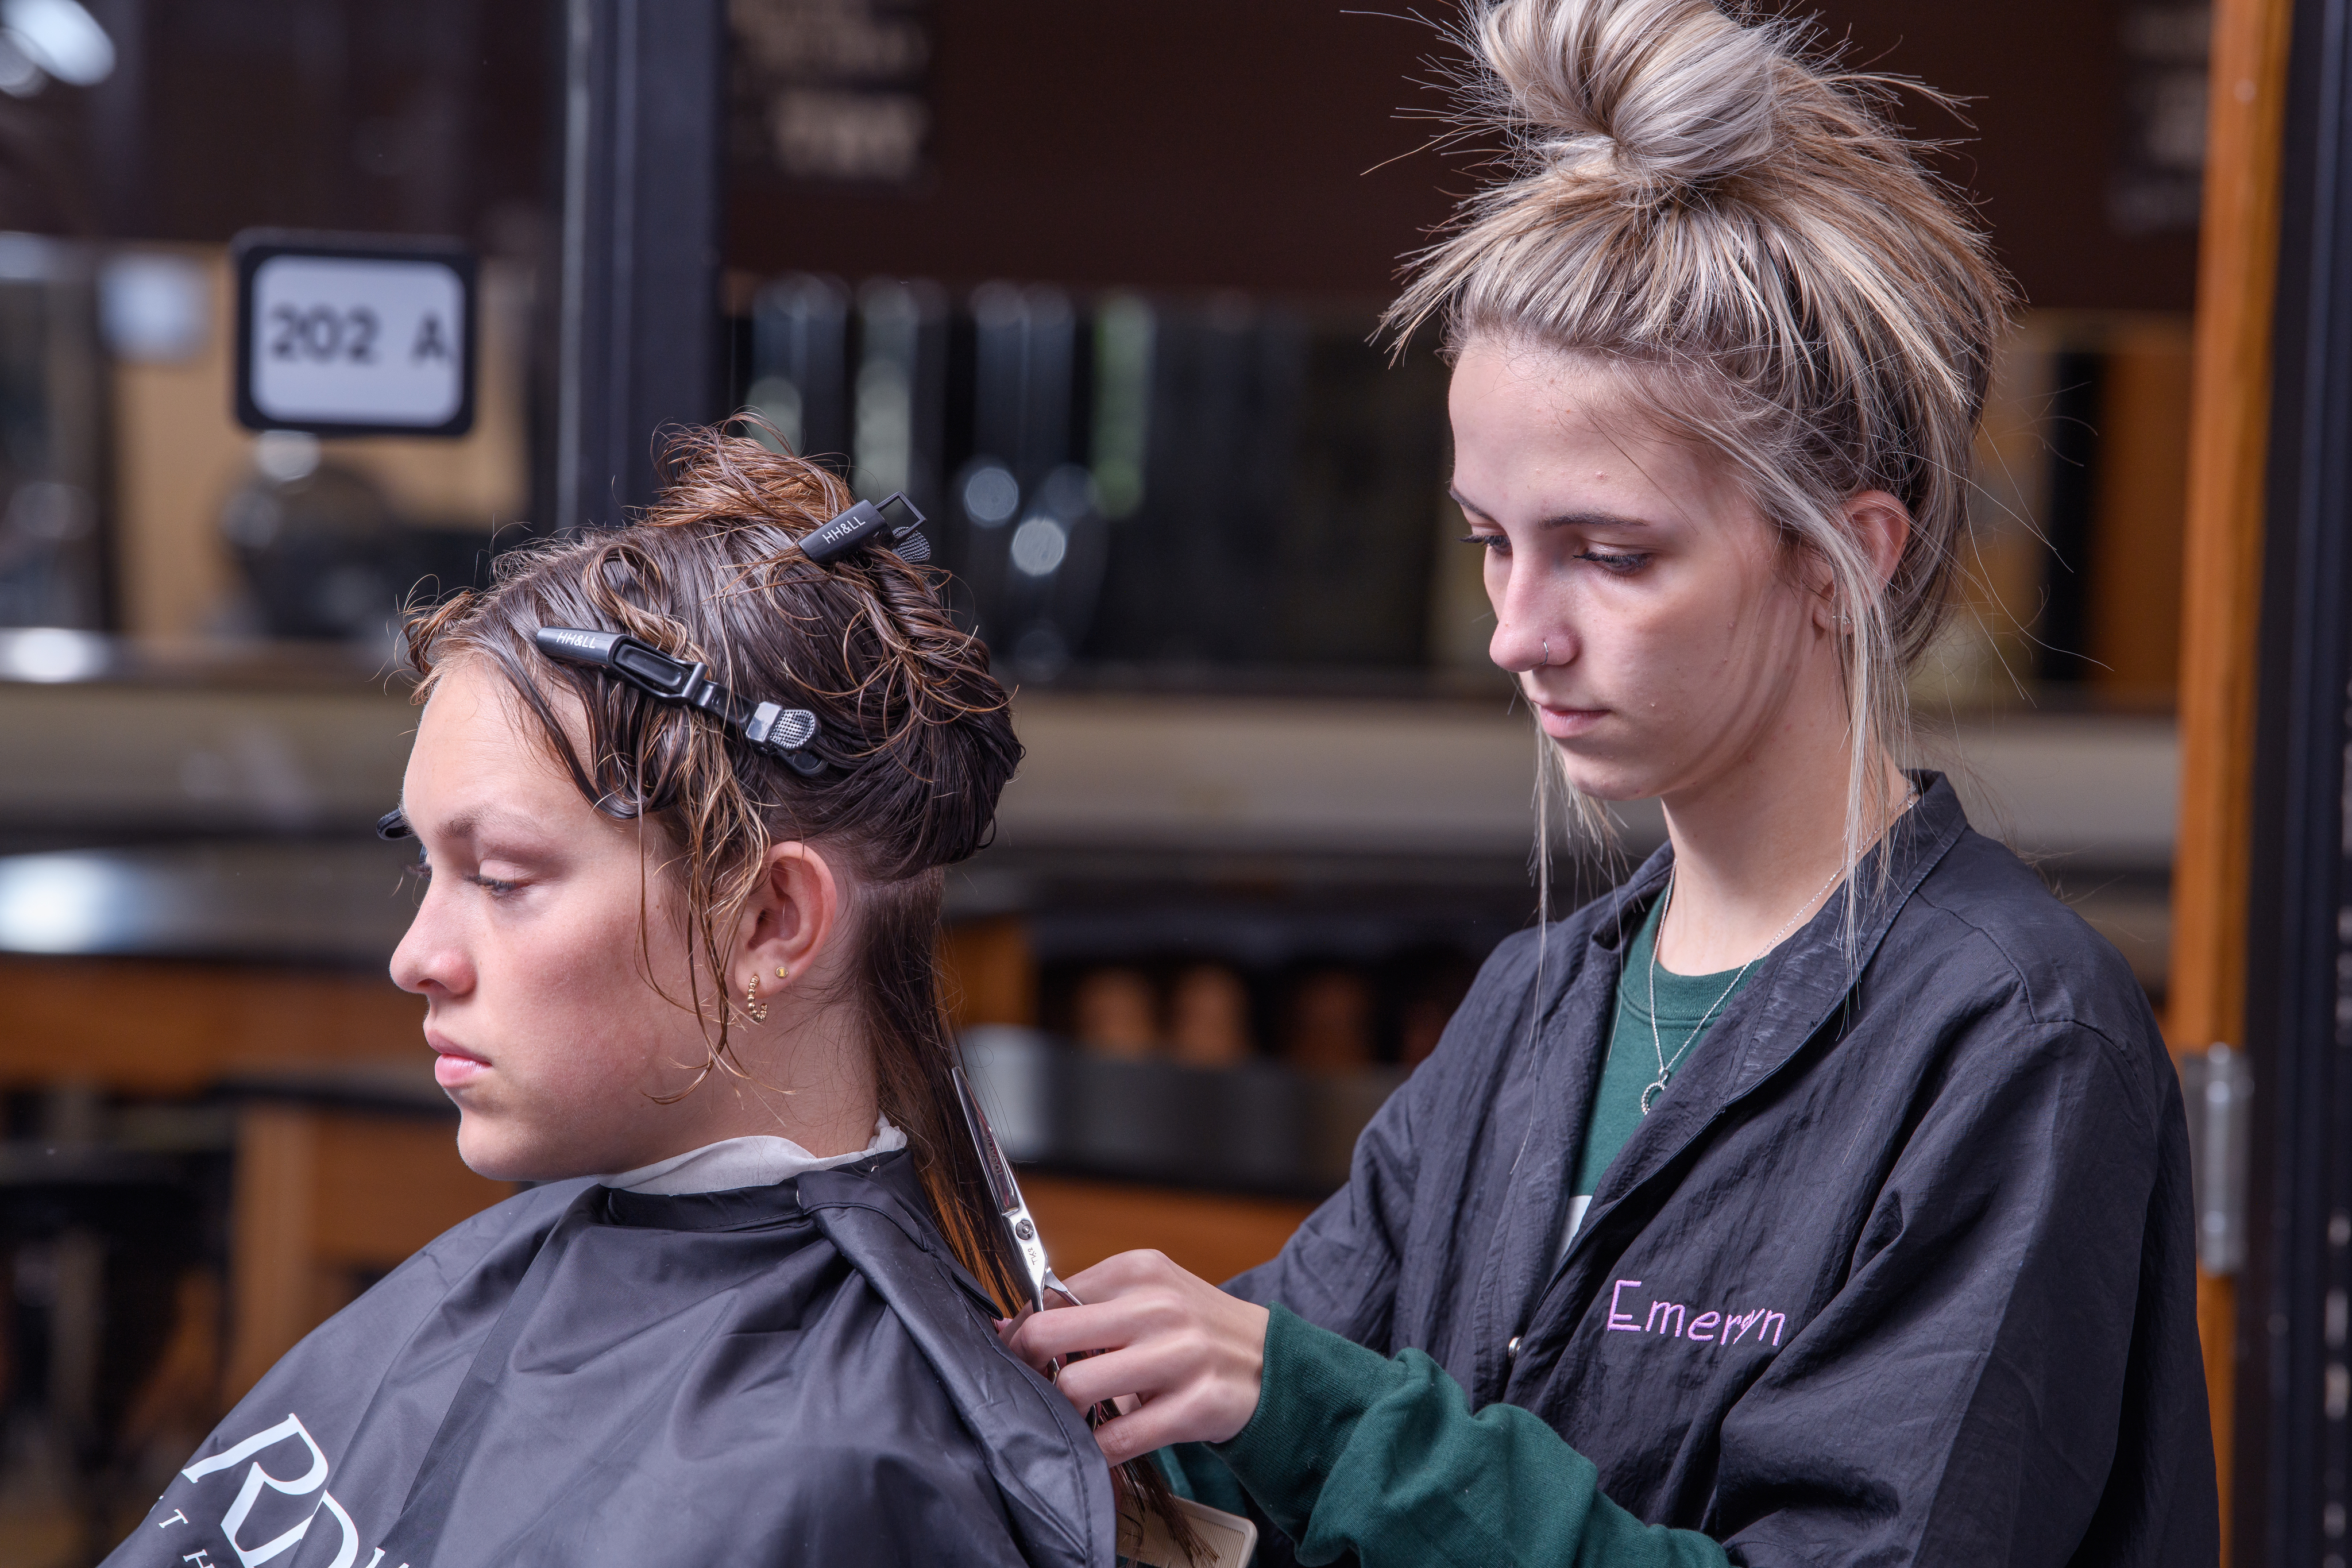 Female cosmetology student begins a haircut on a guest in the salon.